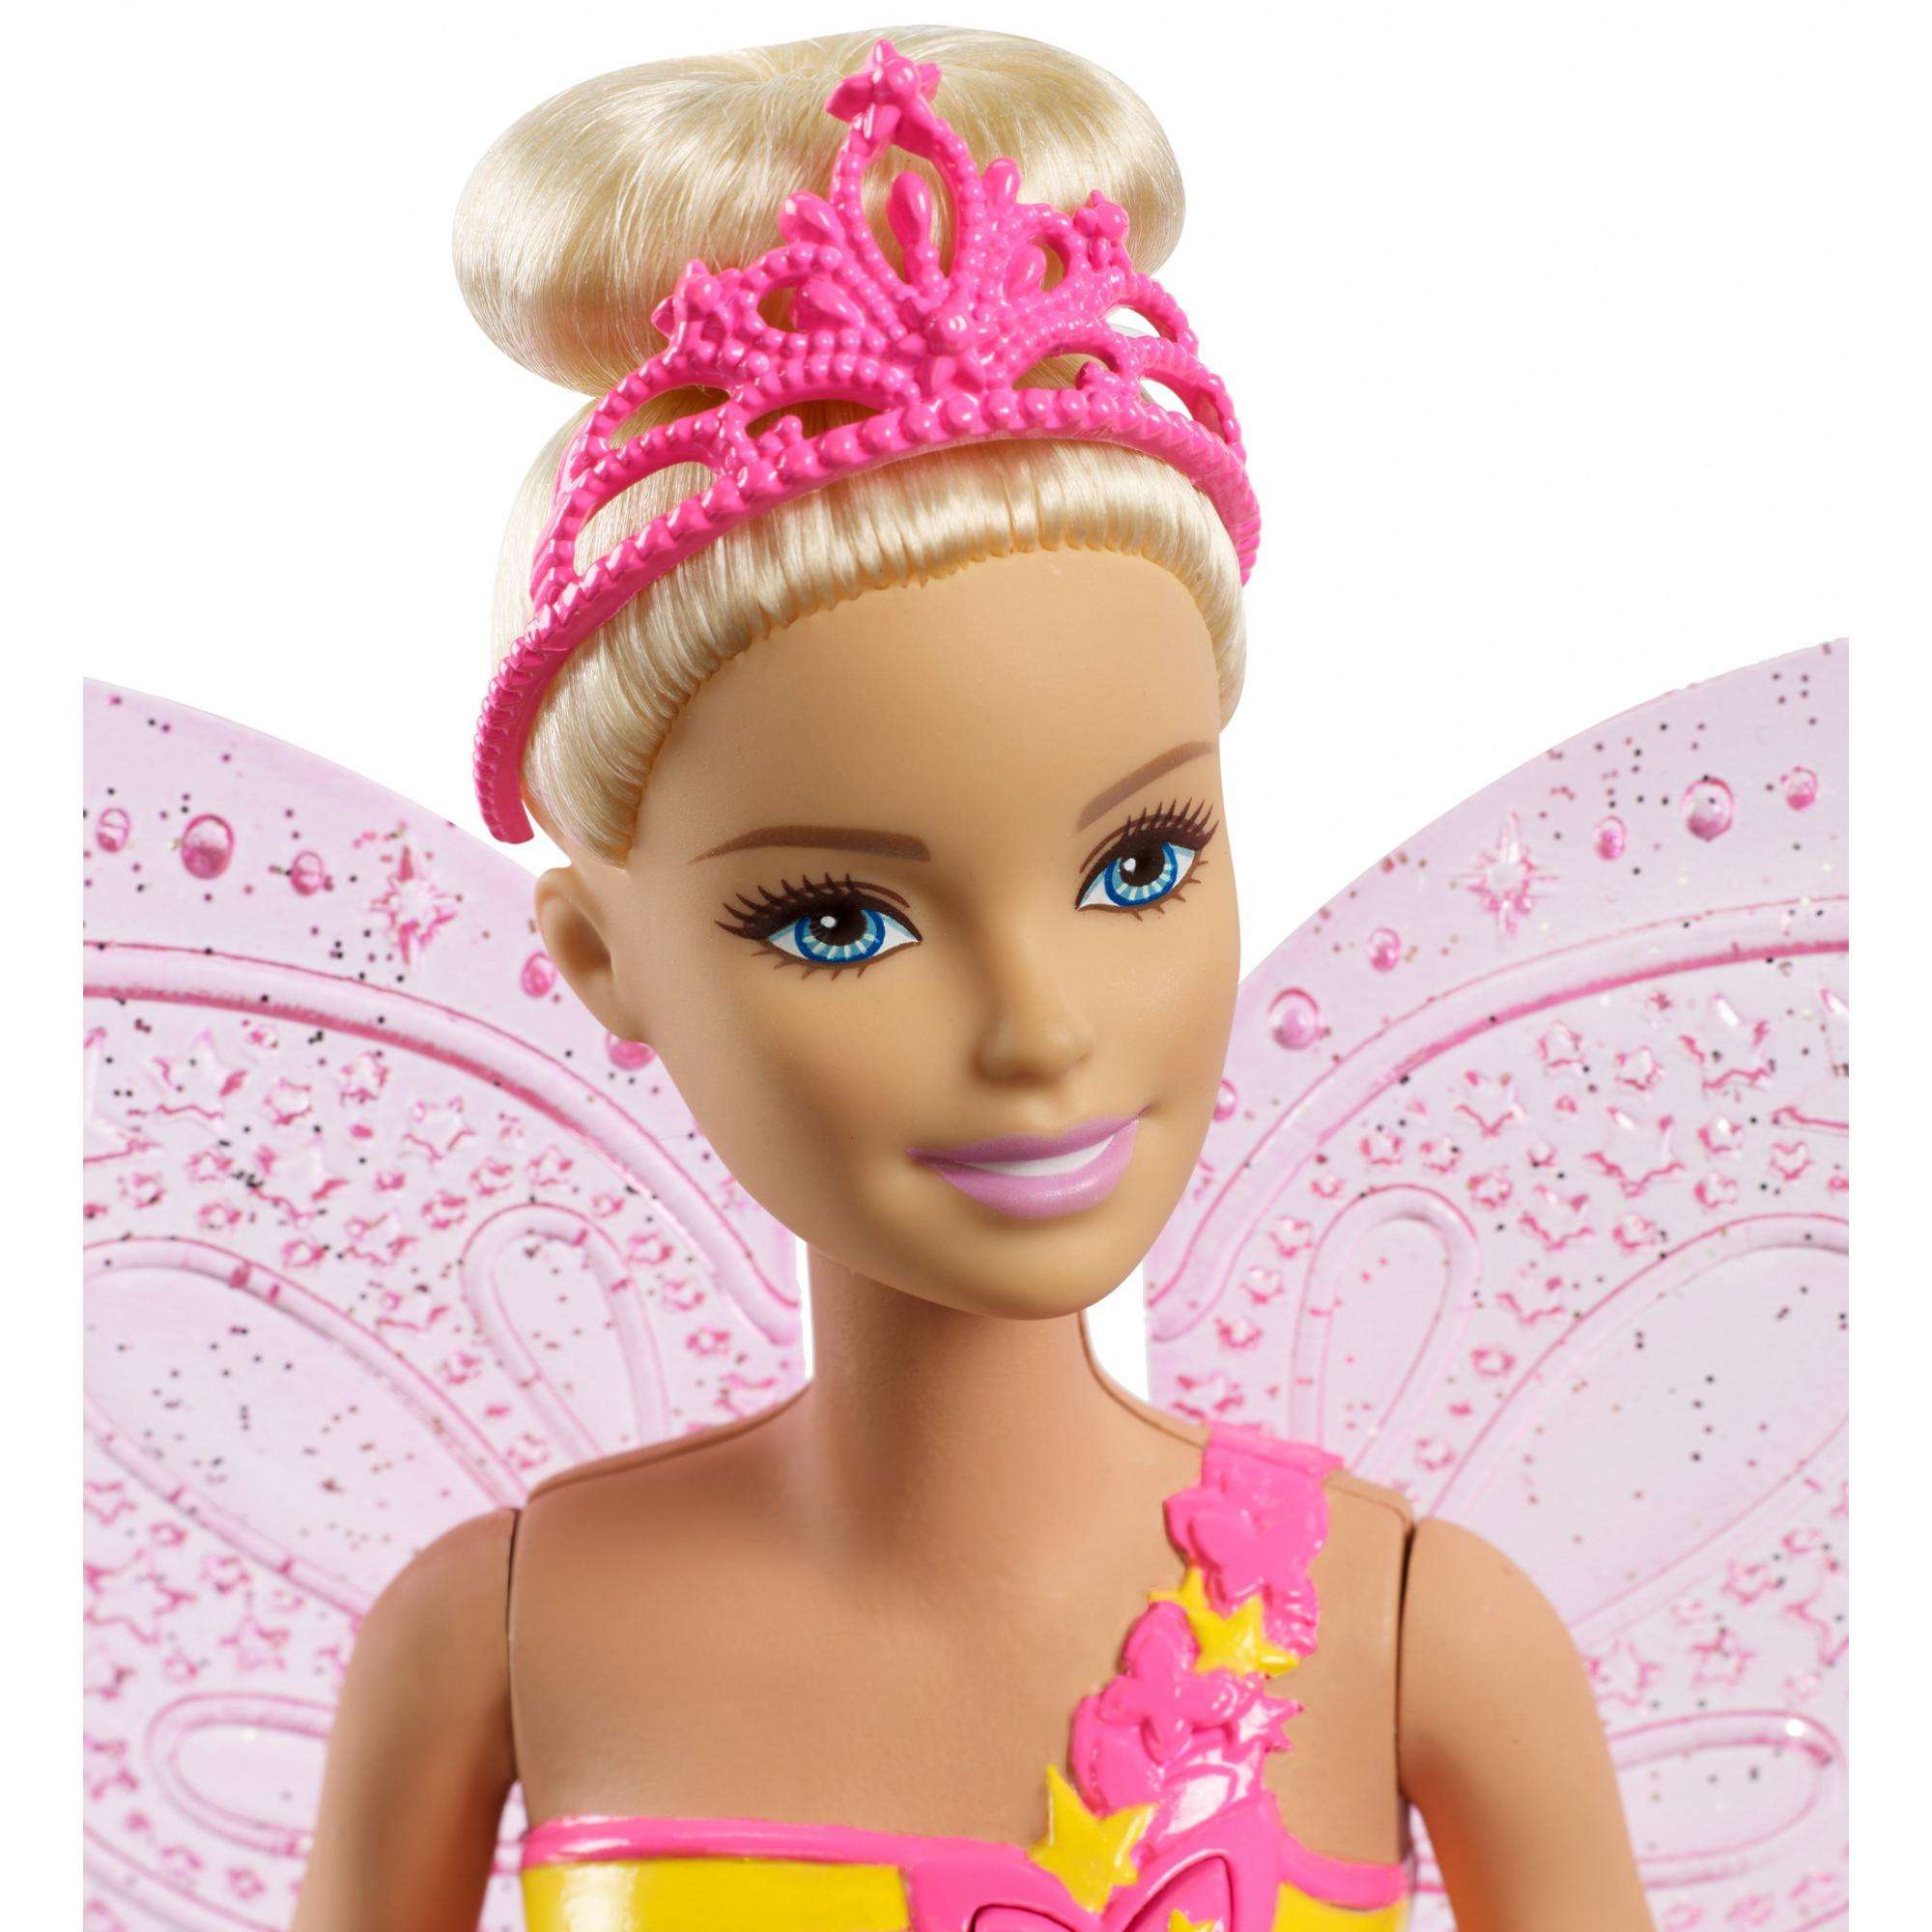 Barbie Dreamtopia Flying Wings Fairy Doll with Blonde Hair - image 7 of 11